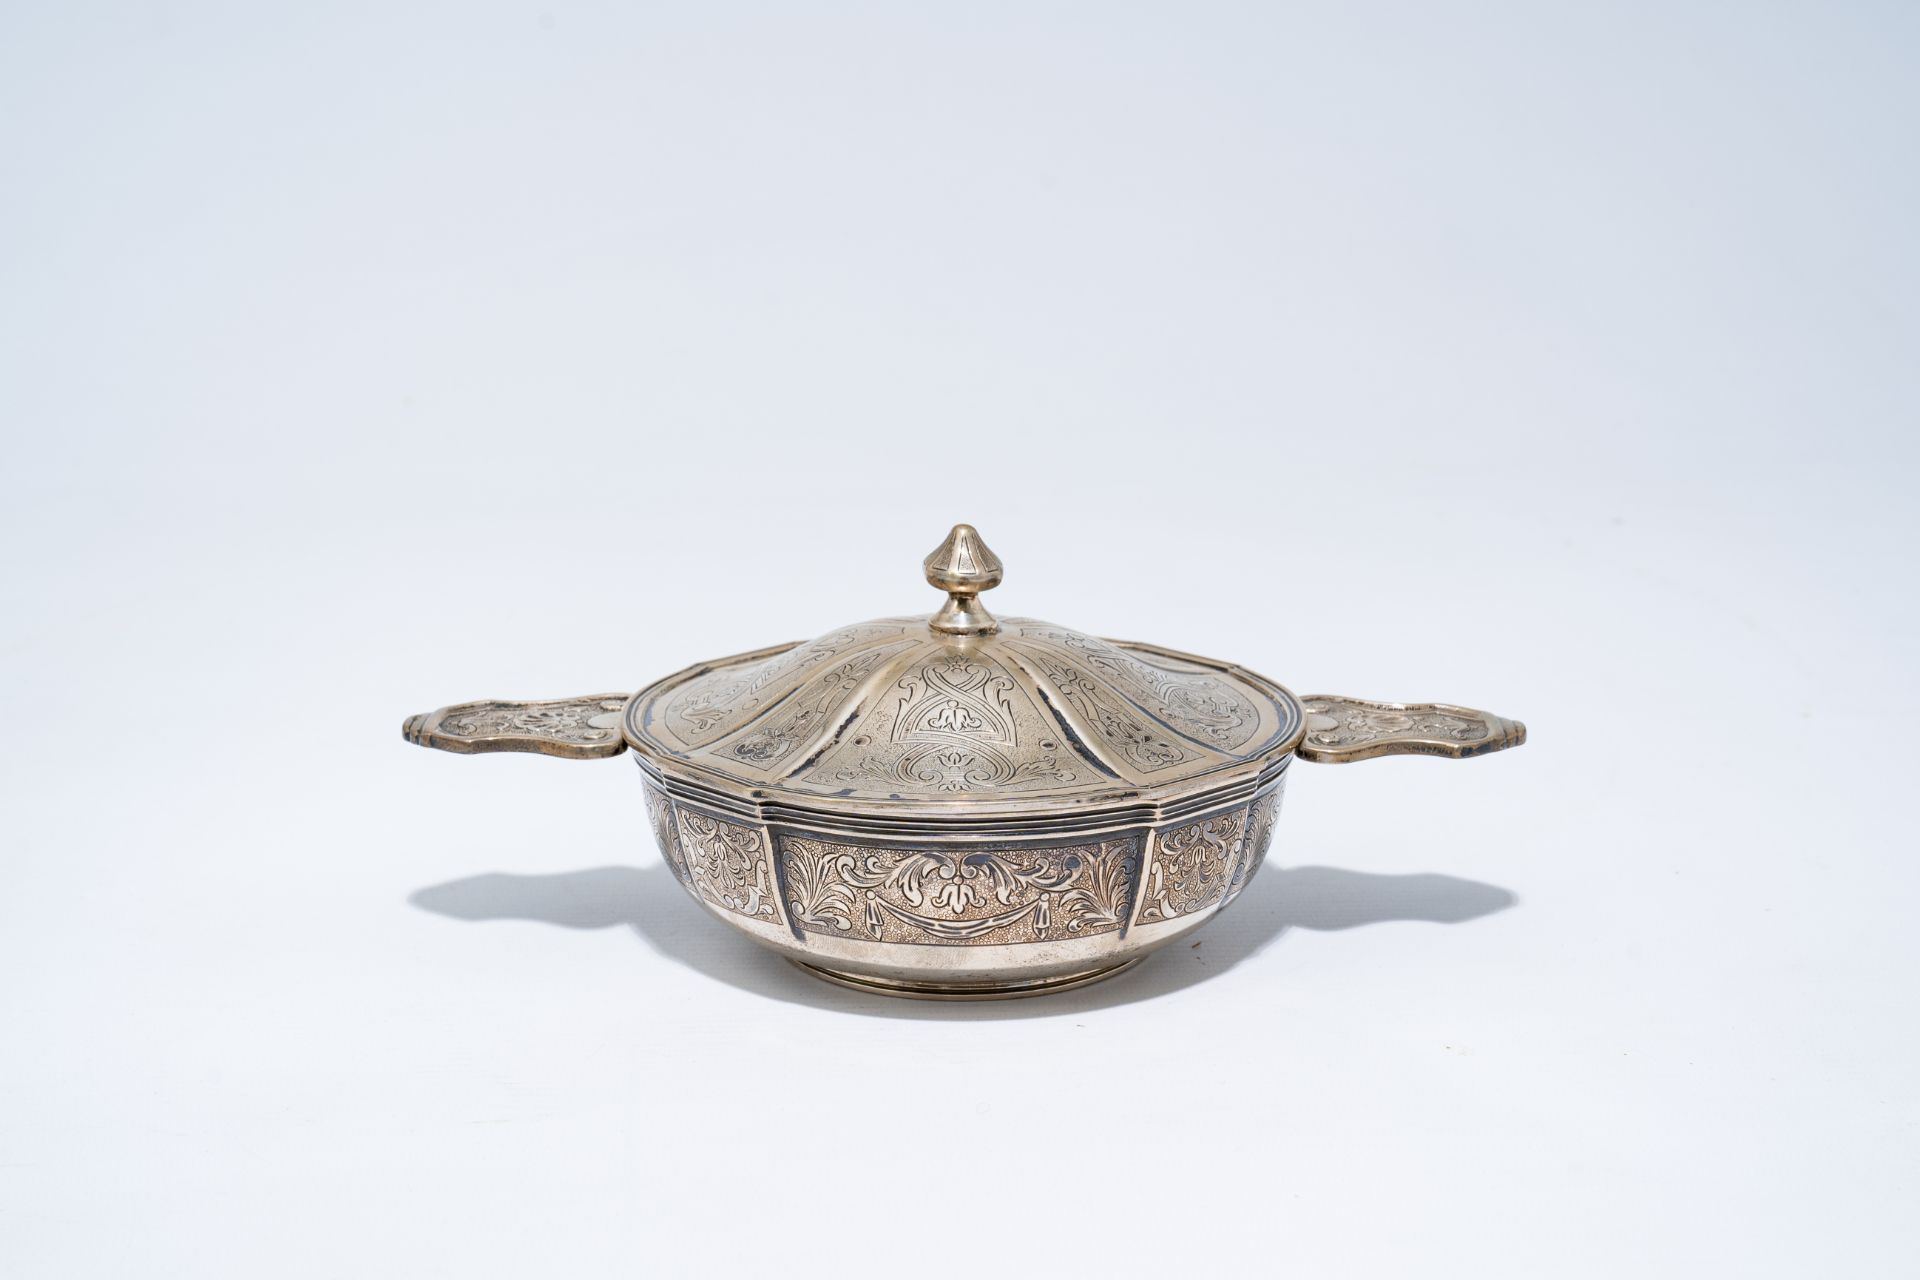 A Belgian silver bowl and cover with floral design, maker's mark Wolfers, 800/000, 20th C. - Image 2 of 9